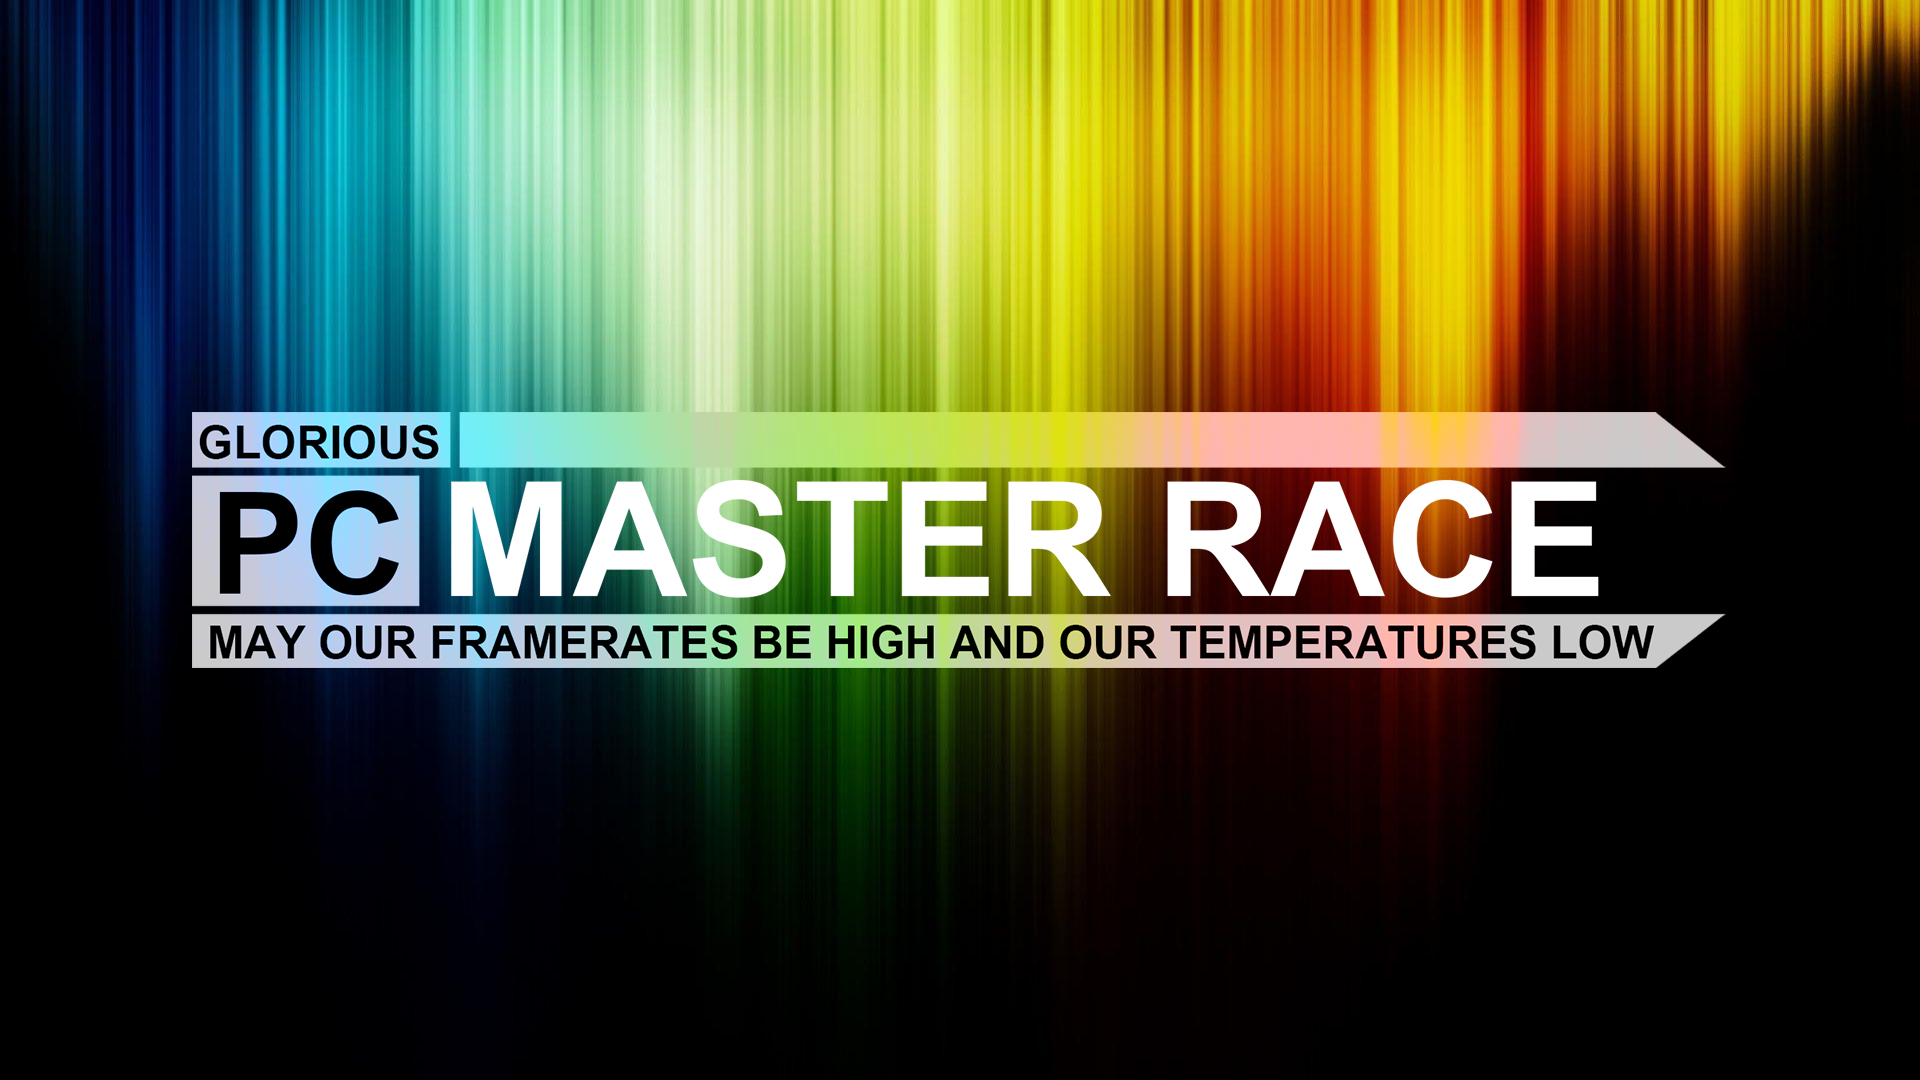 pc master race wallpaper,text,font,green,yellow,graphic design